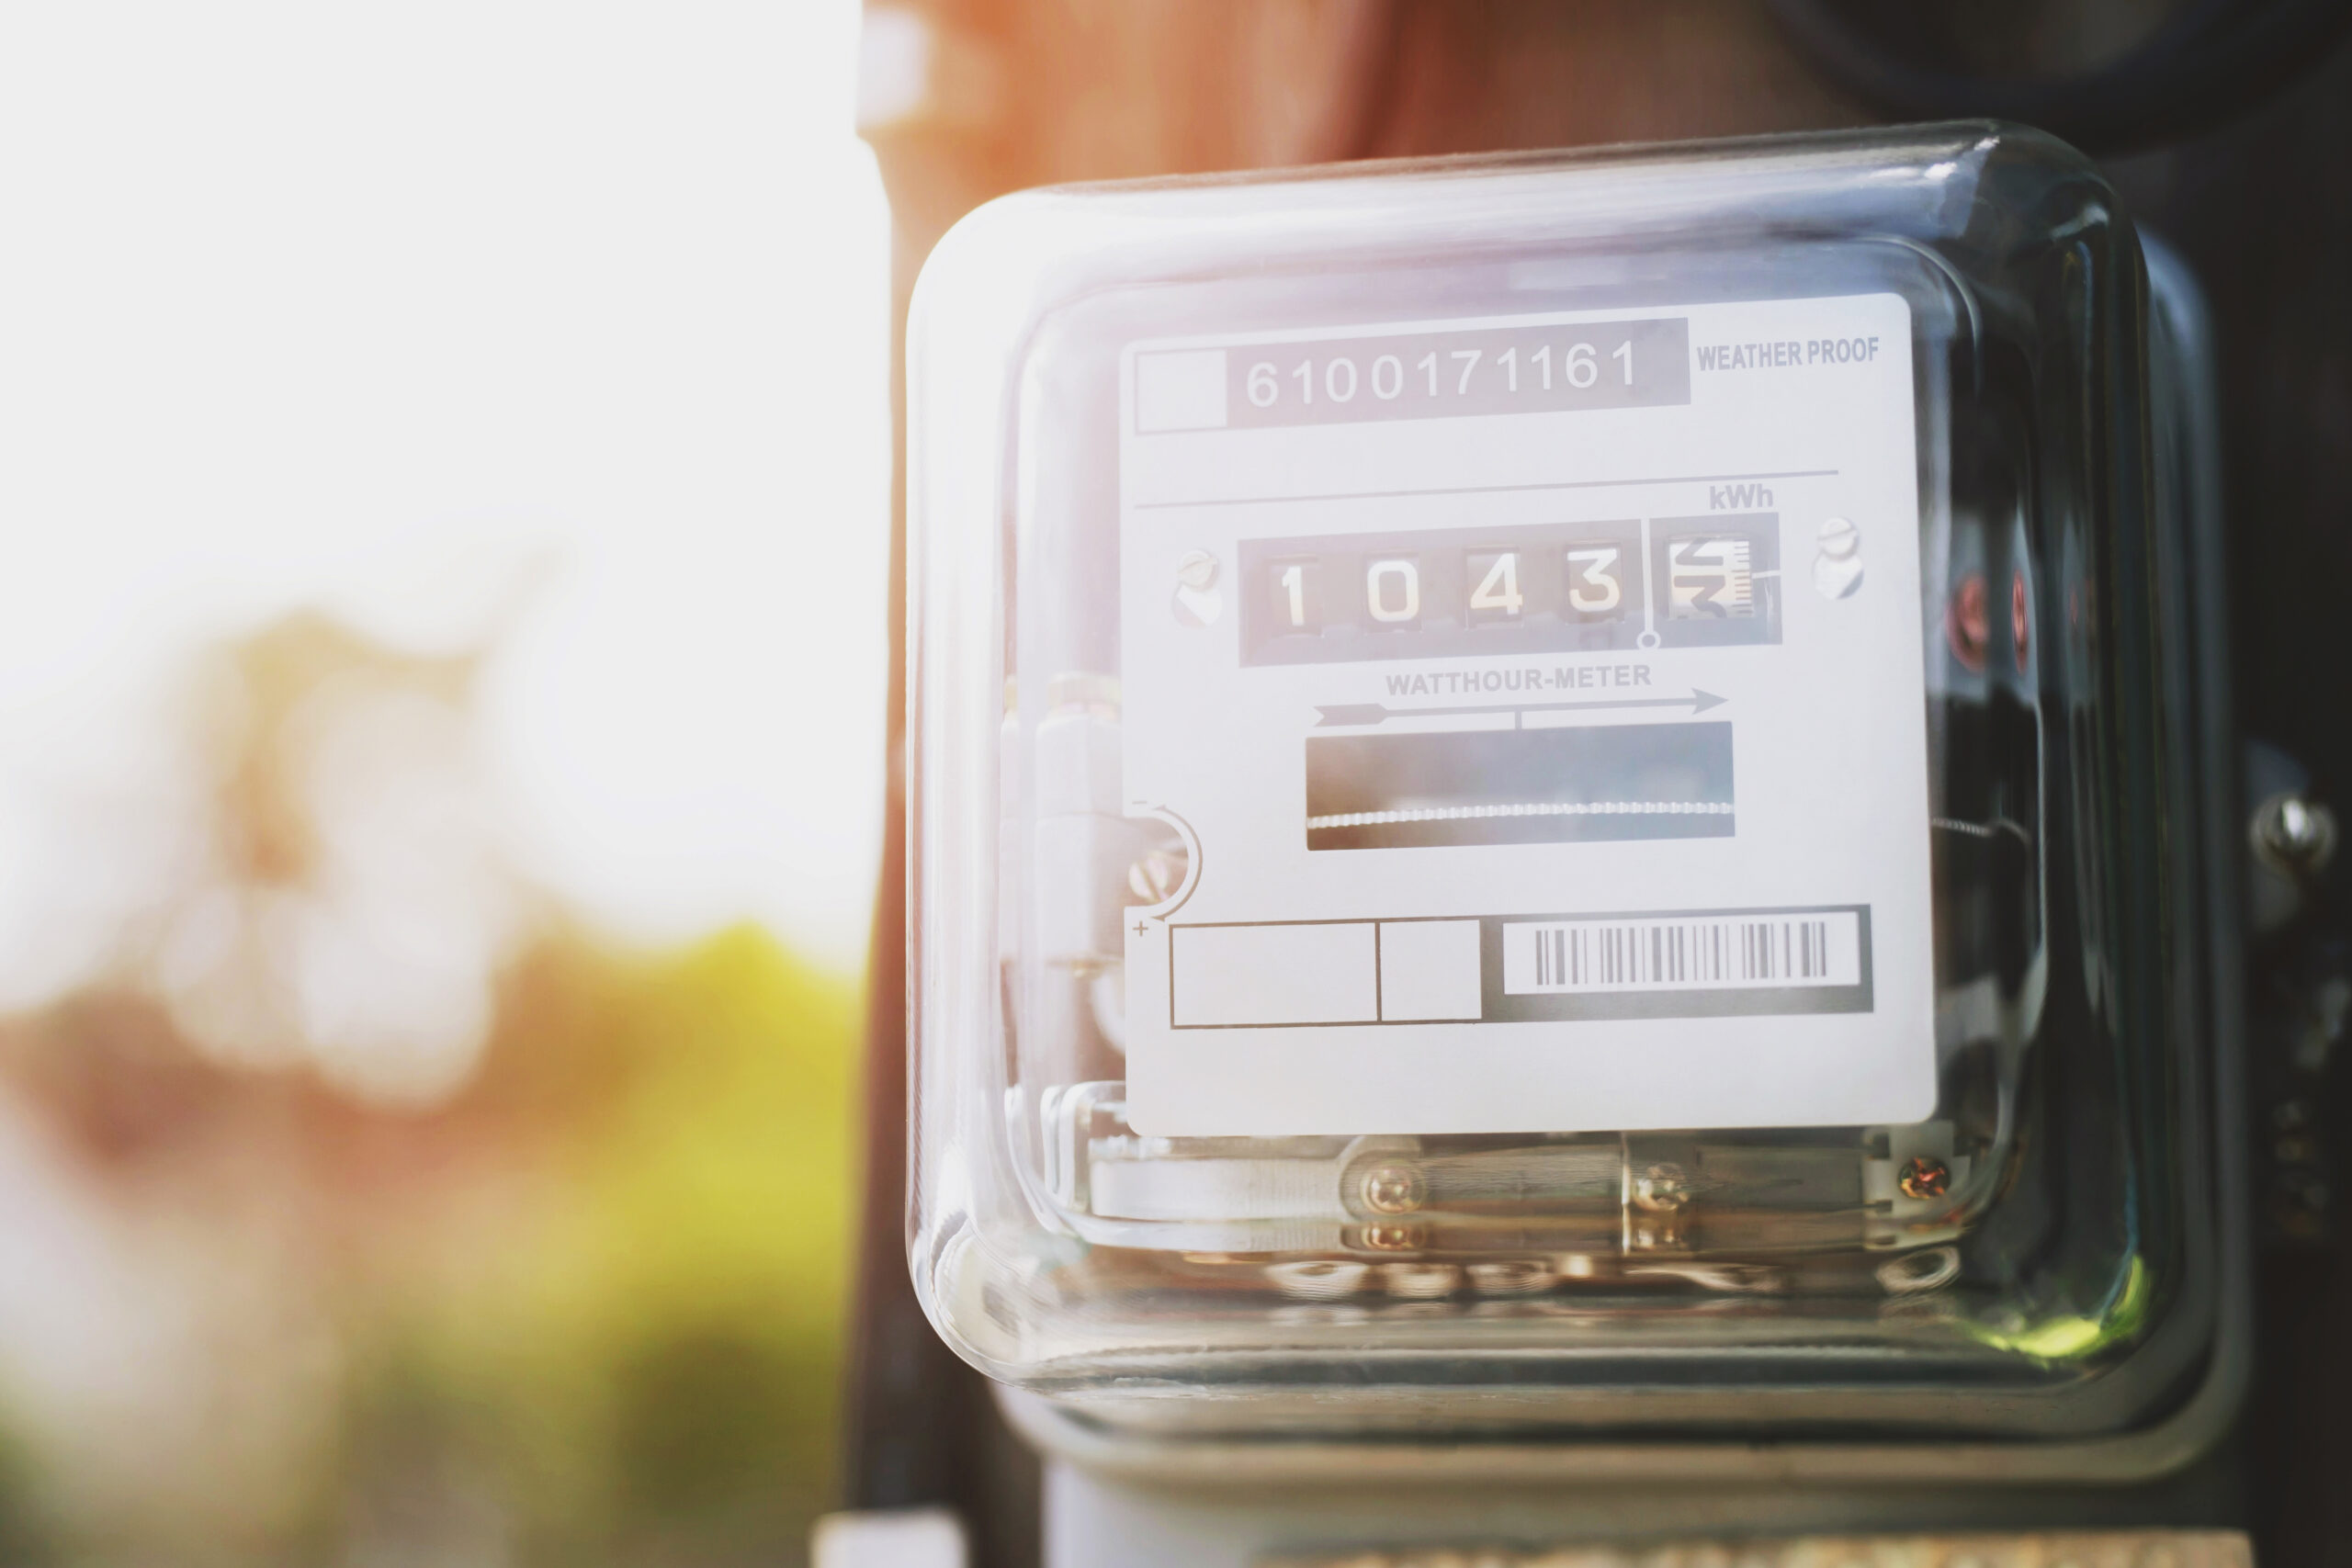 How to Read an Electric Meter: Monitor Usage on Digital/Analog